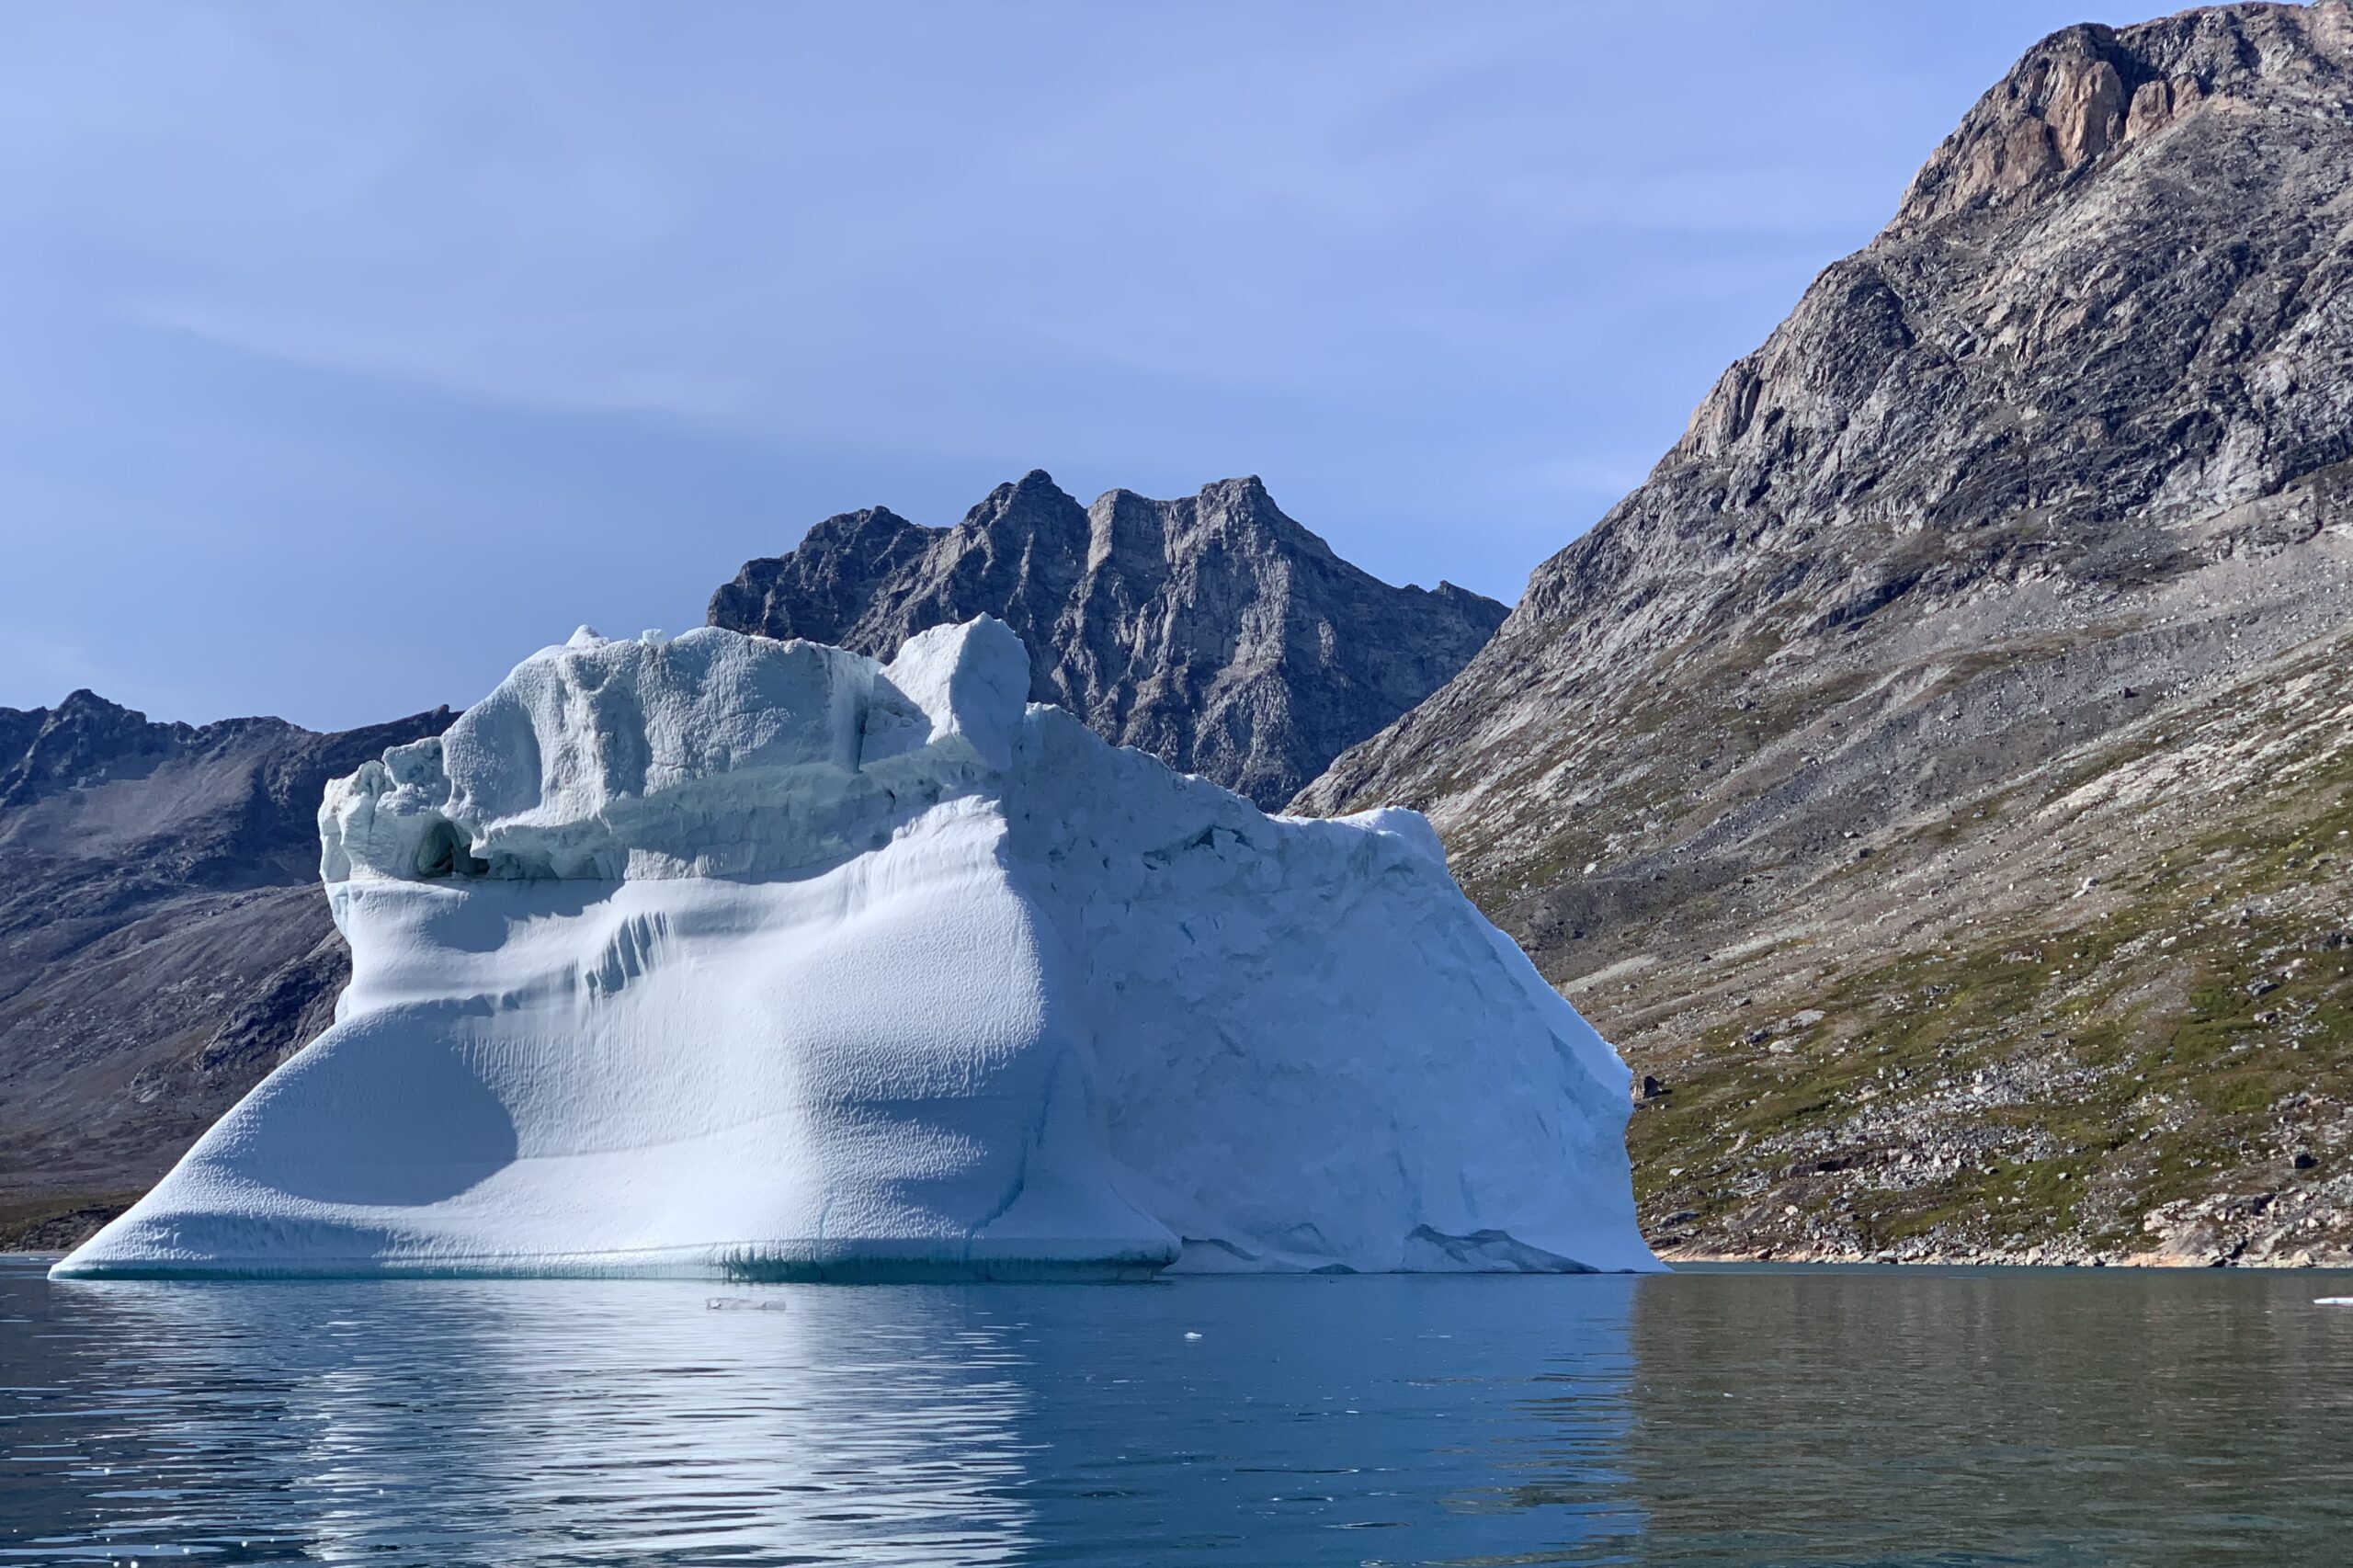 Iceberg views while sailing in East Greenland. Photo by Natalia Andersen - Visit East Greenland